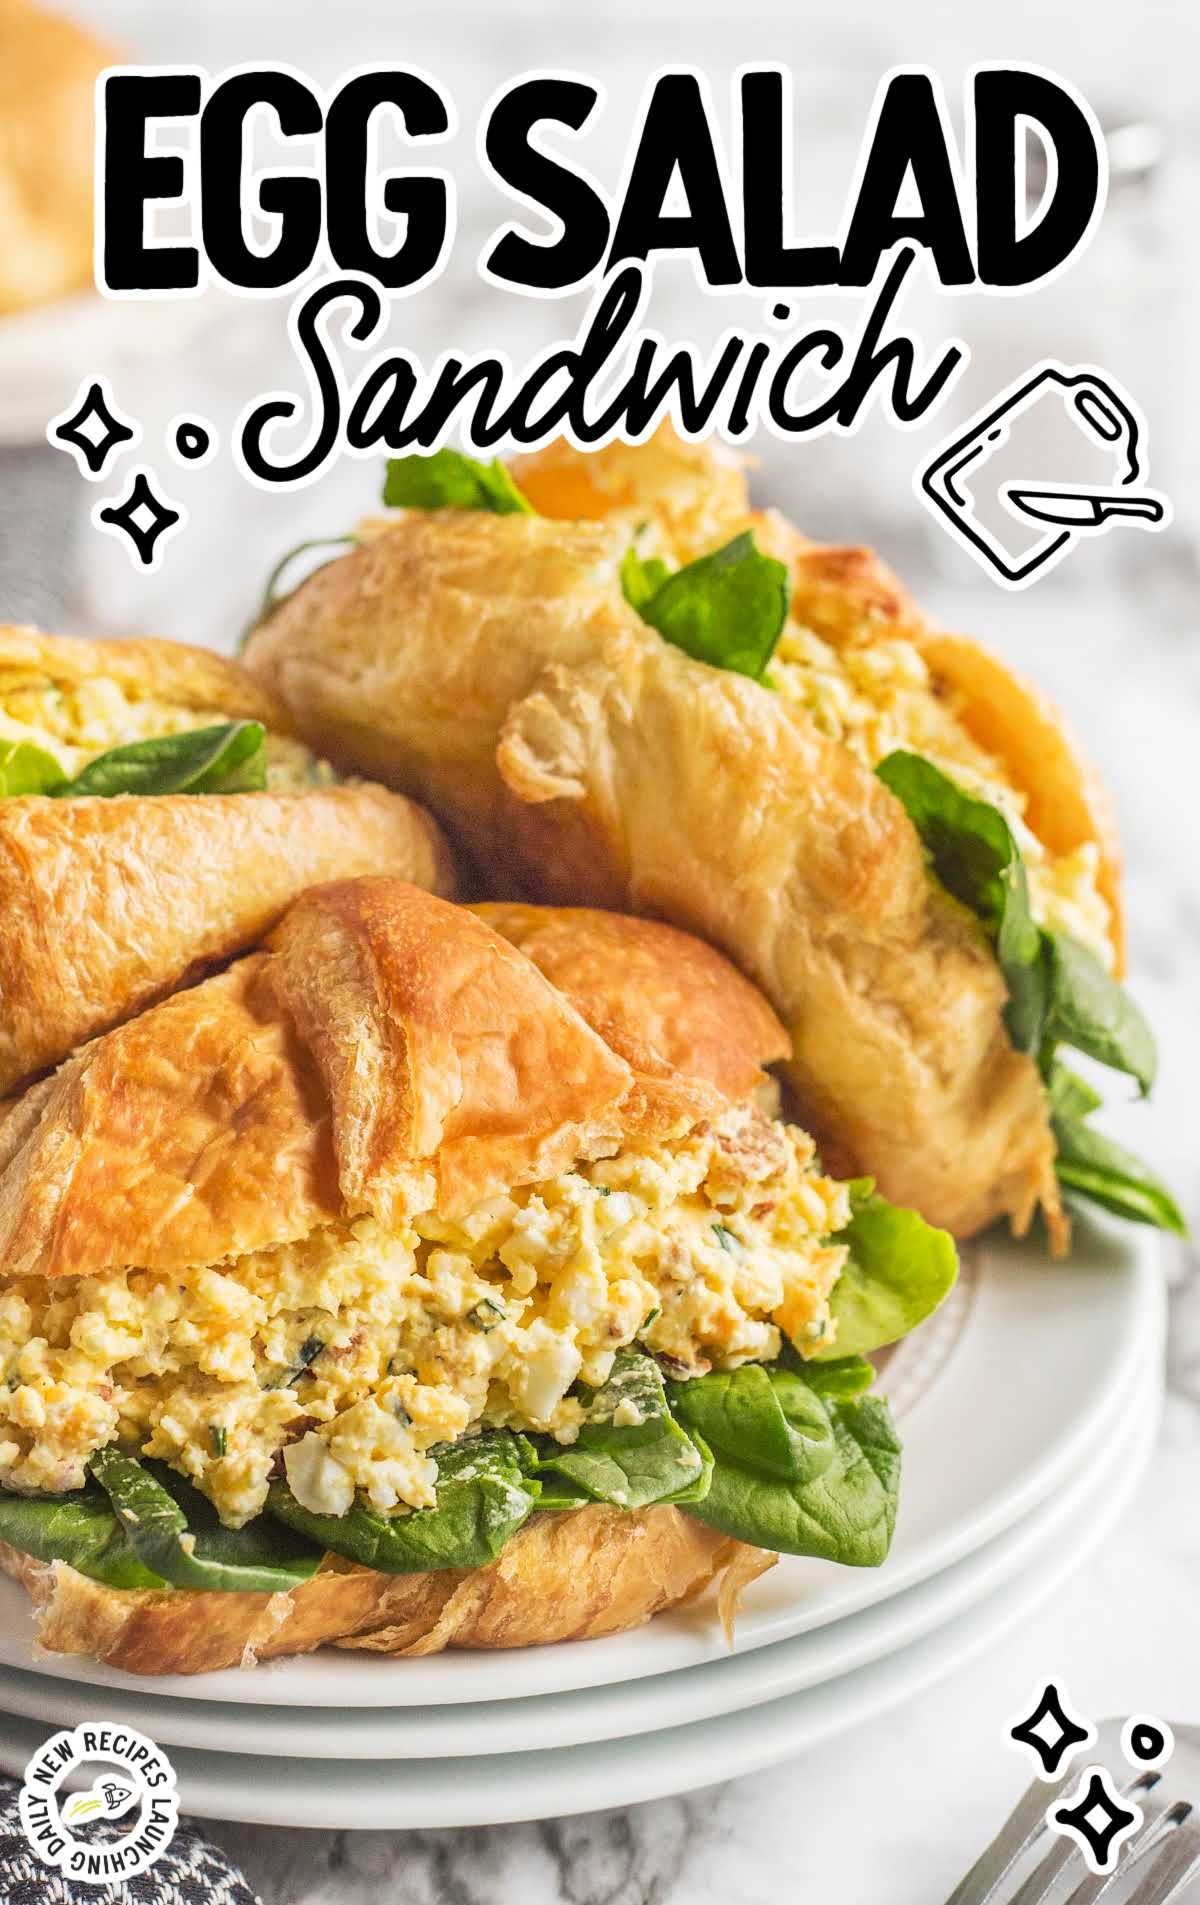 Egg Salad Sandwiches on a plate